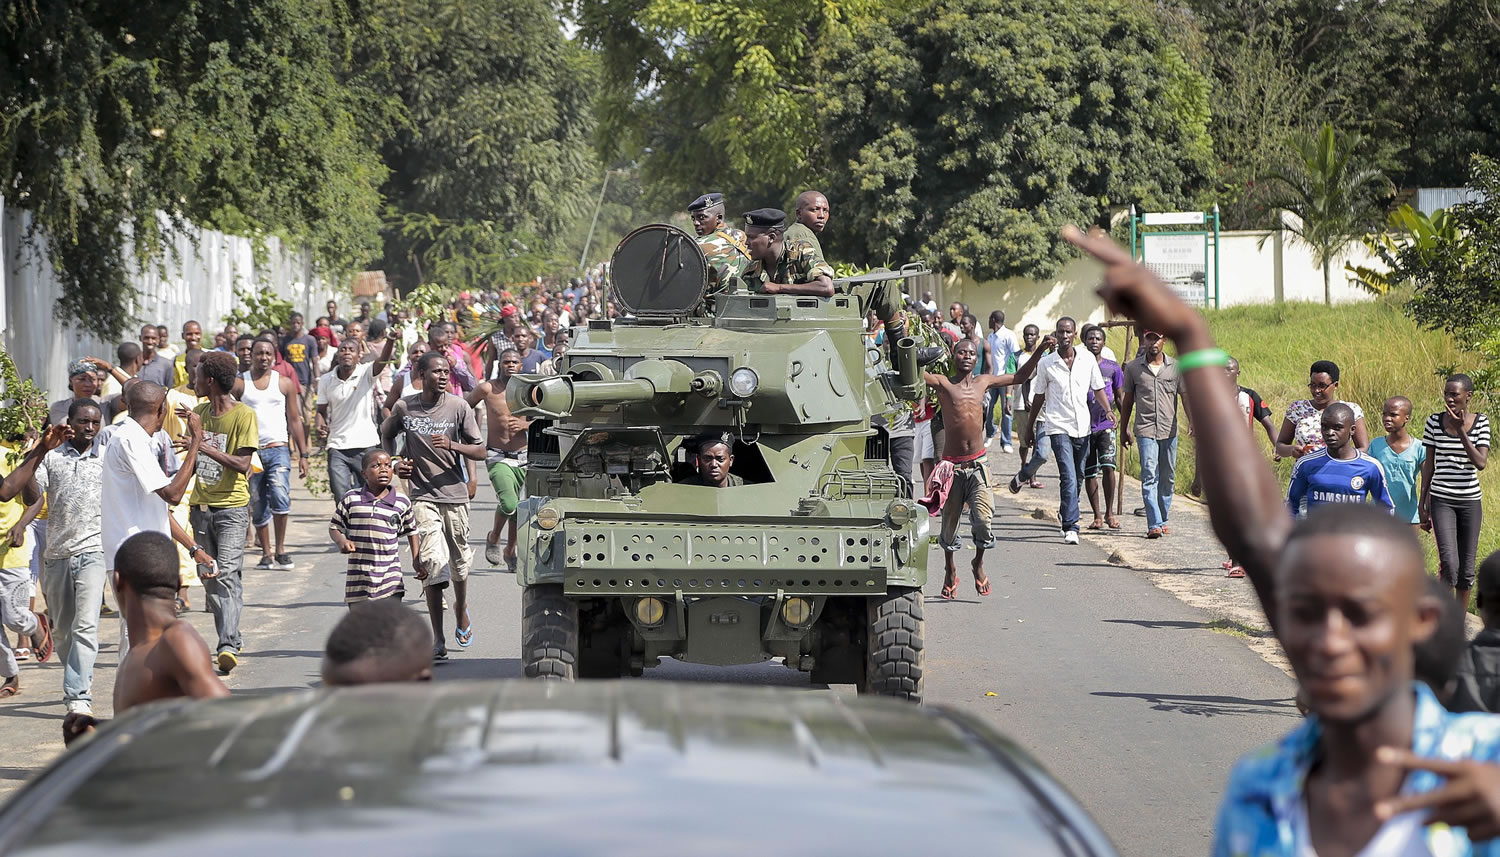 Burundi army soldiers ride through the streets in an armored vehicle as demonstrators celebrate what they perceive to be an attempted military coup d'etat, in the capital Bujumbura, Burundi, on Wednesday.